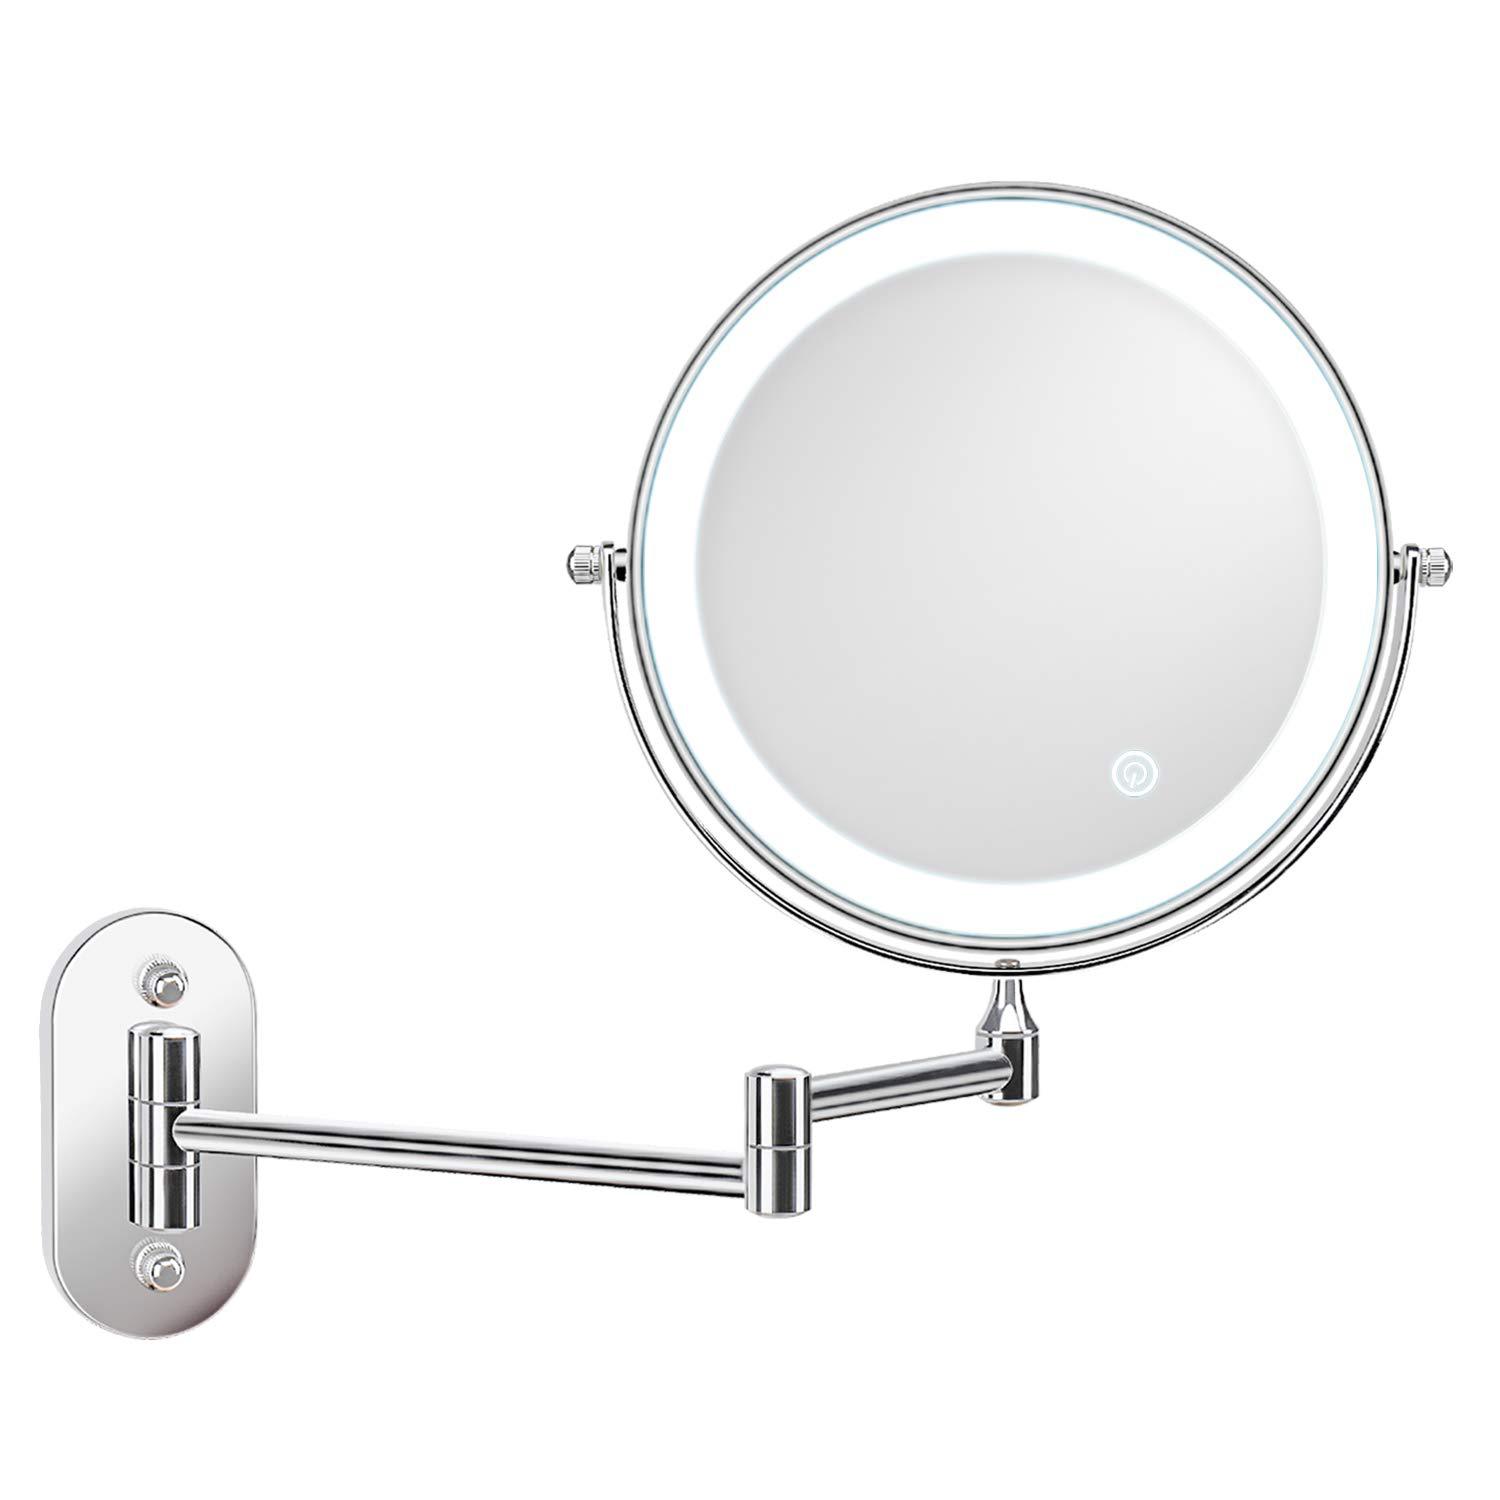 8-Inch Wall-Mounted Double Mirror Fill Light Makeup Mirror Charging LED Color Temperature Control Three-Color Dimming Bathroom Mirror